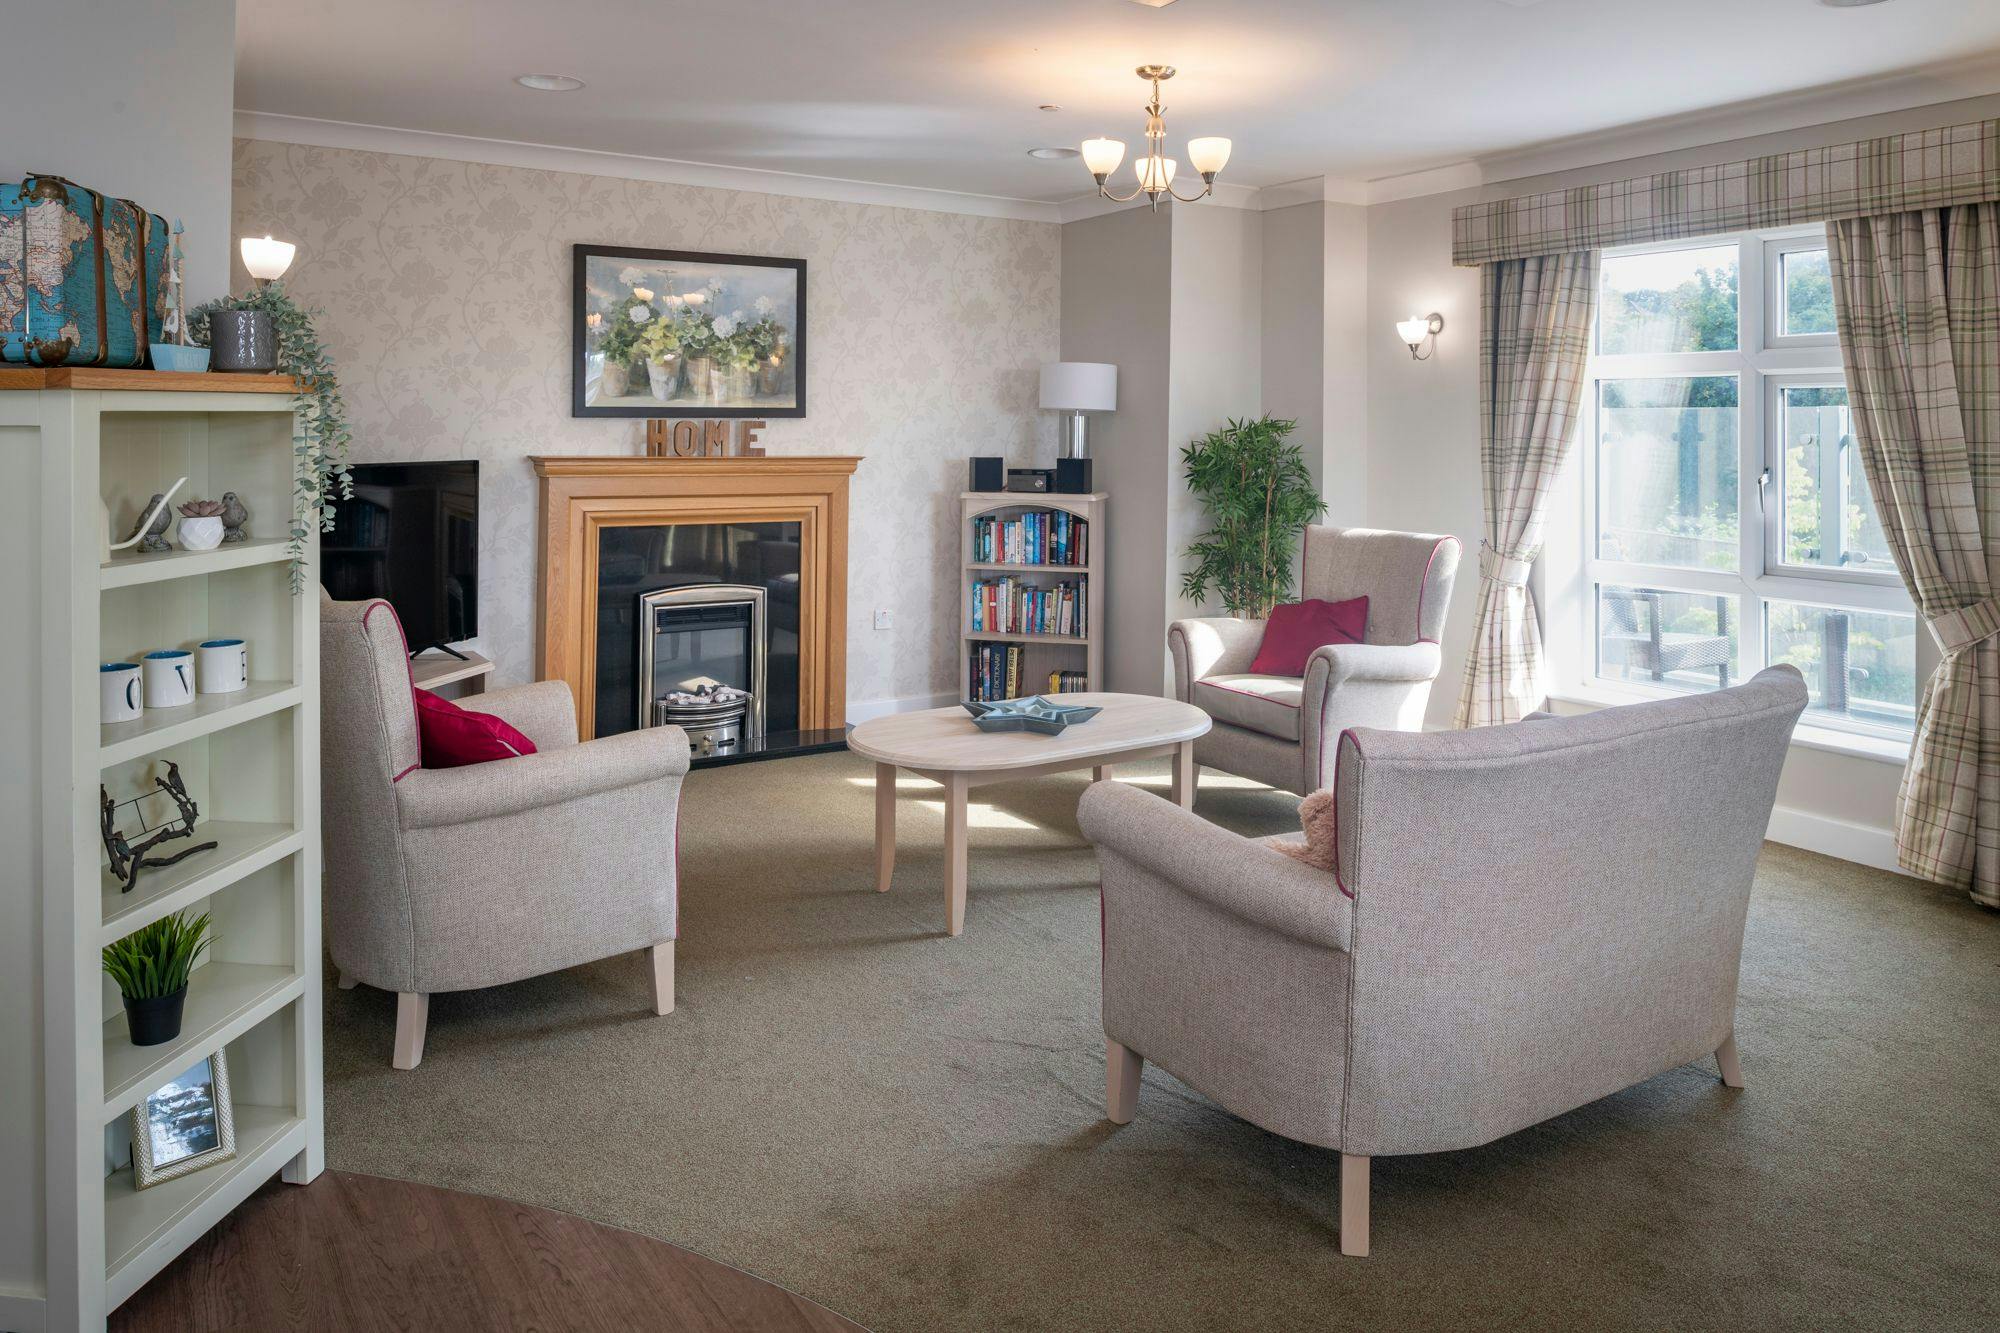 Communal Area at Grace Care Home in Thornbury, South Gloucestershire